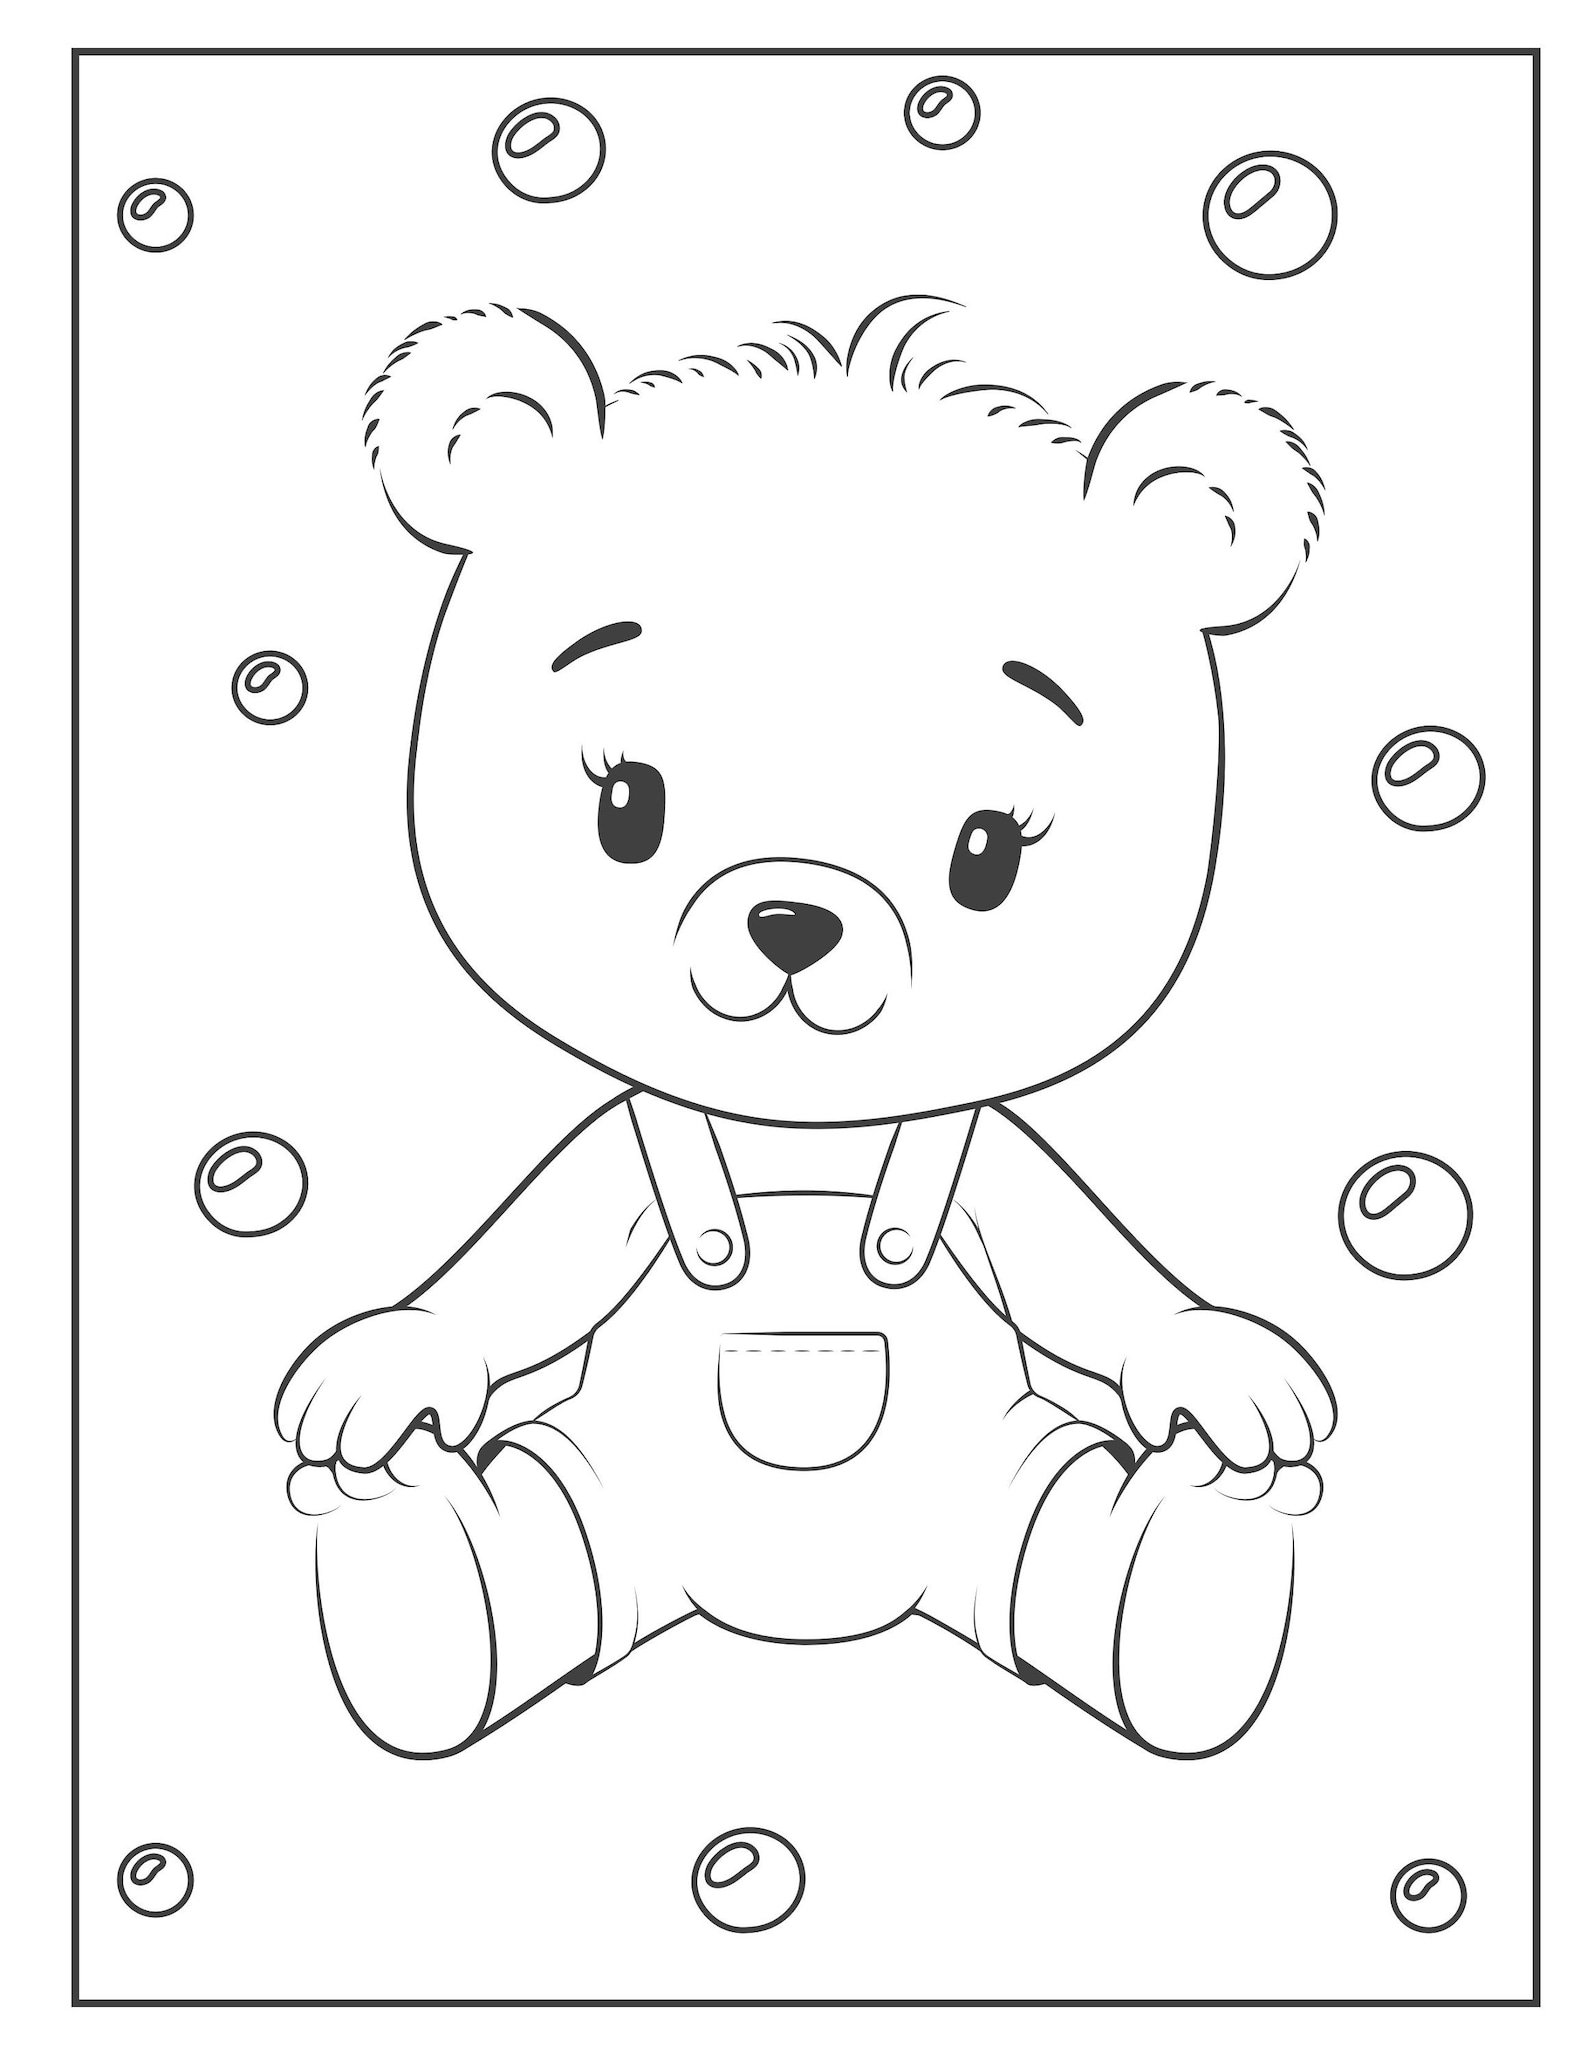 coloring-activity-books-for-kids-etsy